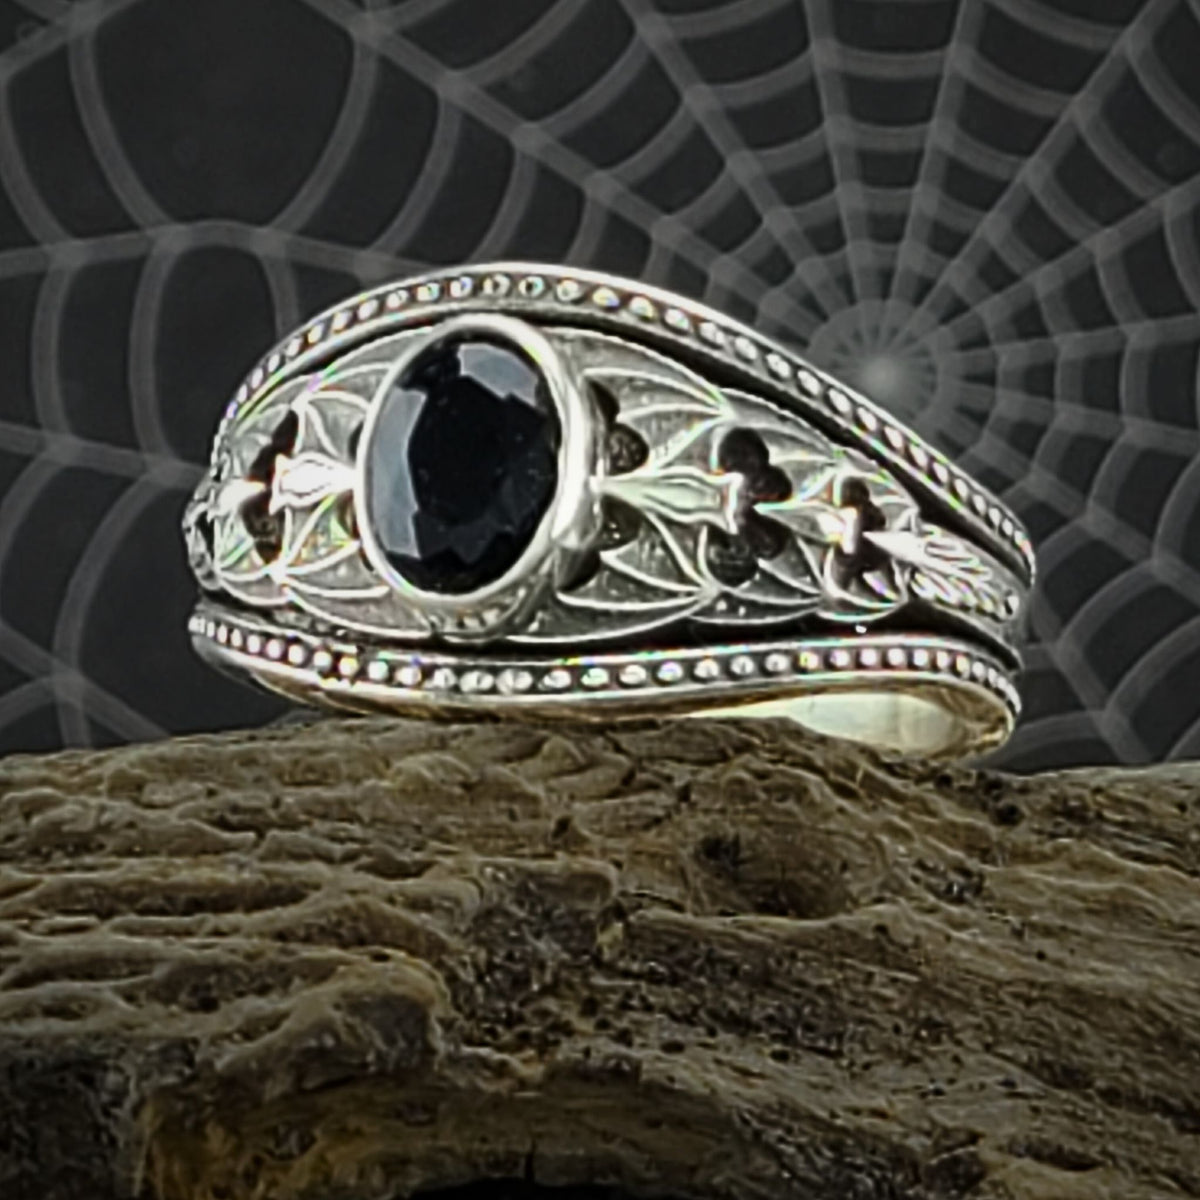 Gothic Nightfall Cascading Bat Solitaire Statement Ring with Oval White or Black Diamond - Just In Time for Halloween Festivities!